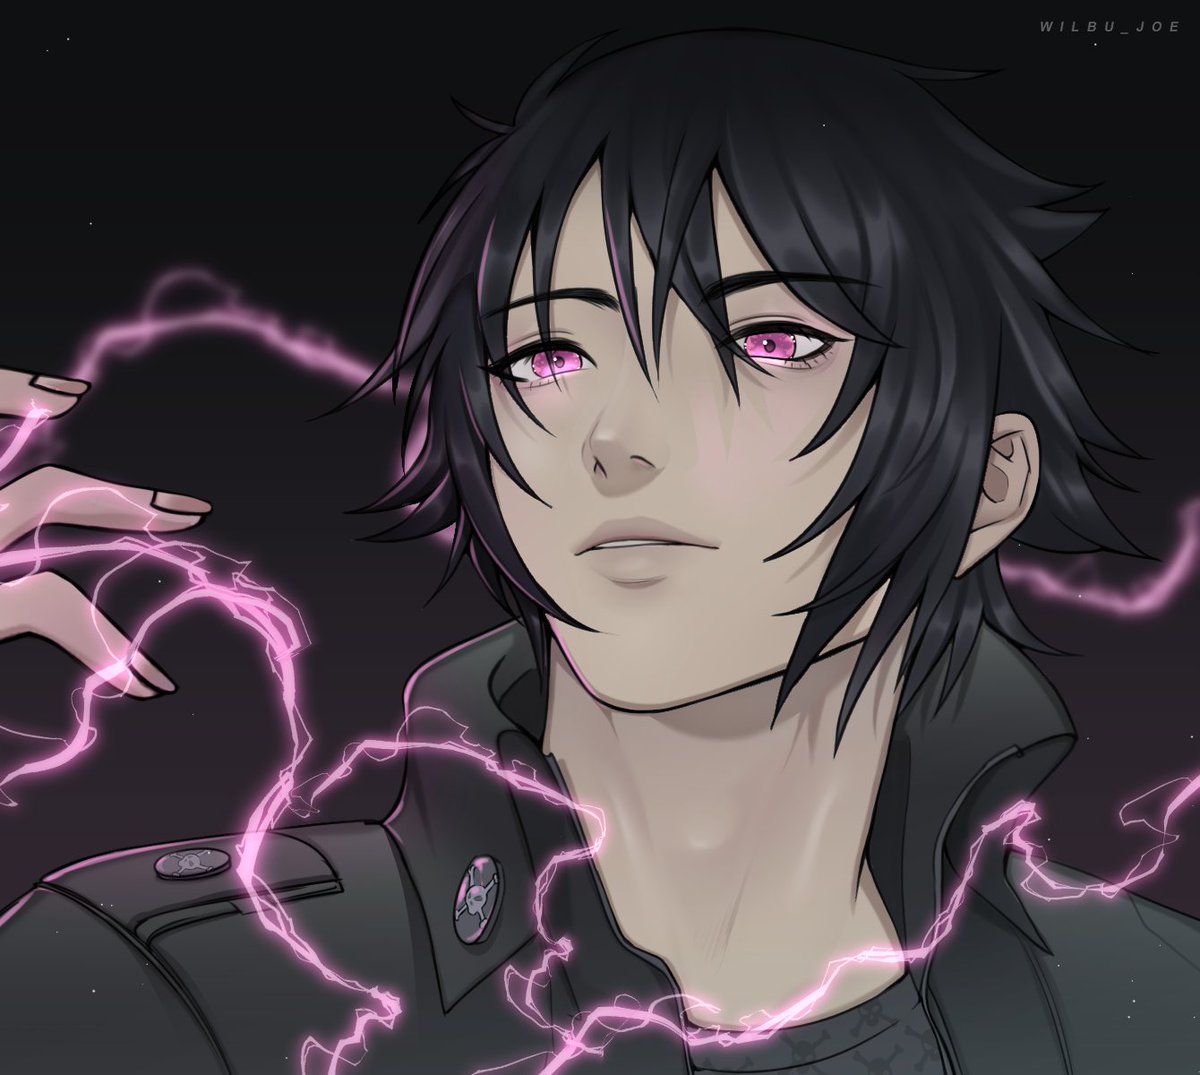 Couldn't decide which color turned out better so ya'll have both...Anywaysss NOCTIS😩💞

#noctislucis #noctis #FF15 #FinalFantasyXV